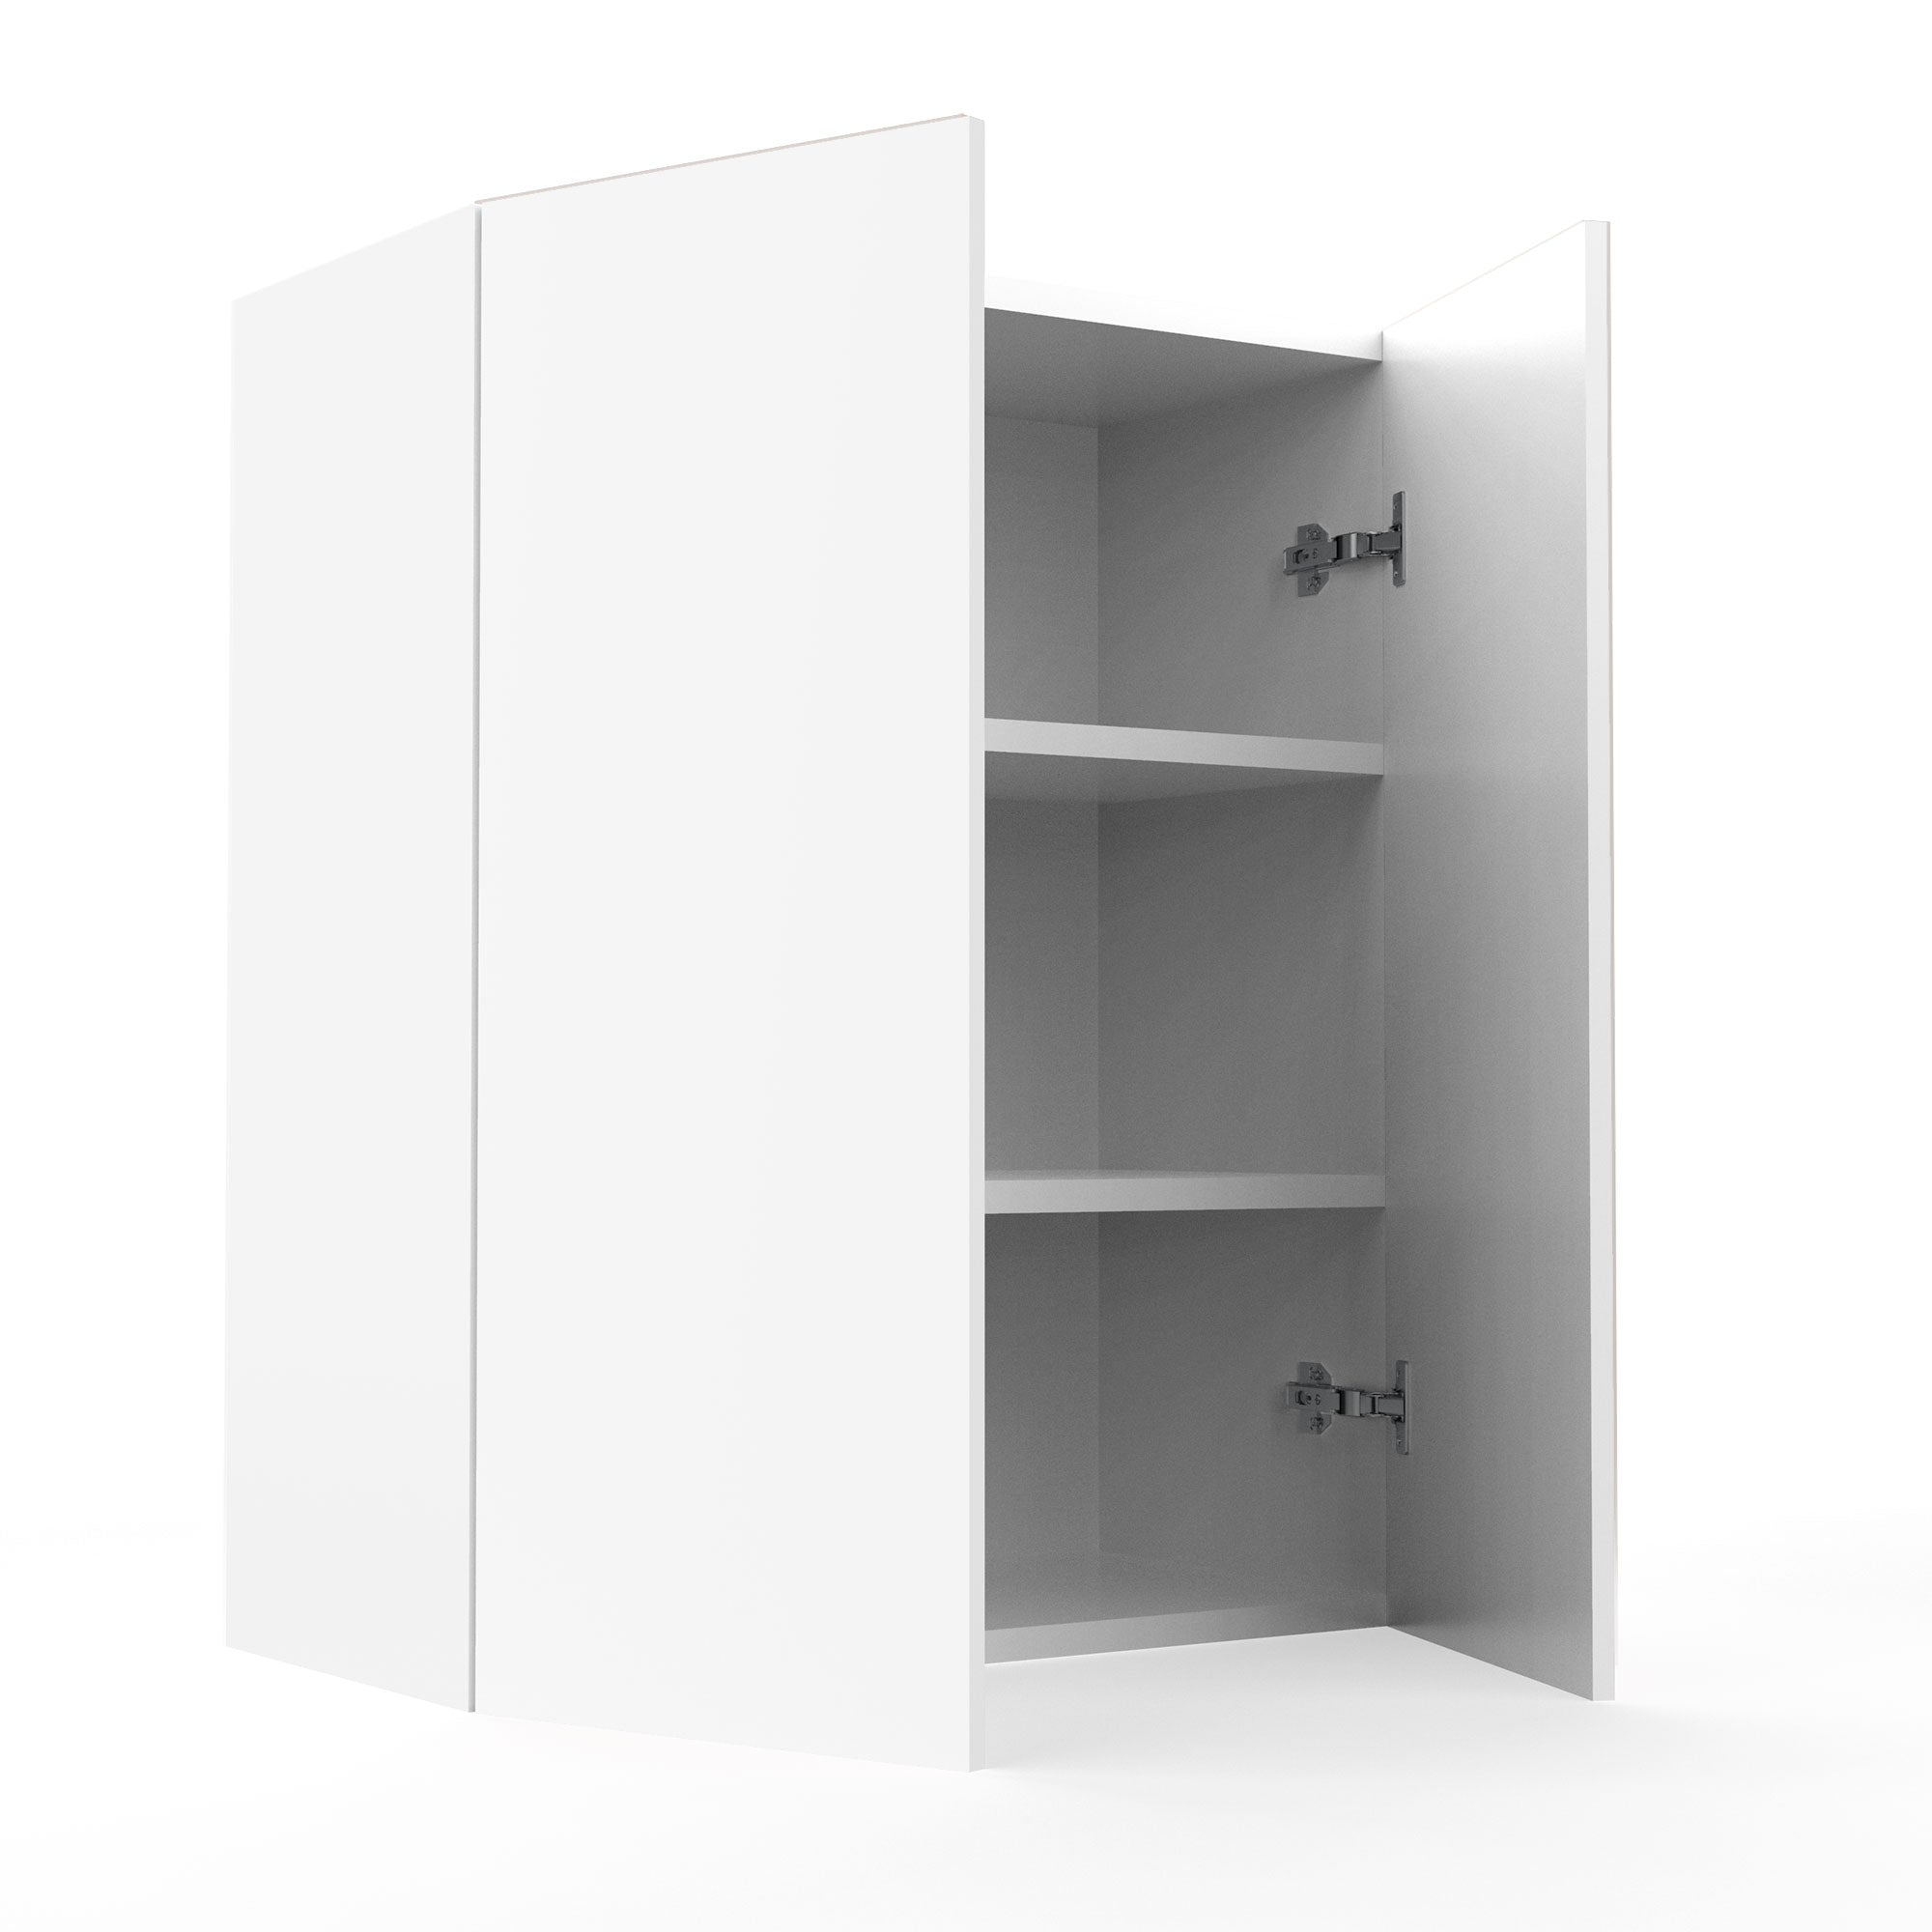 RTA - Glossy White - Single Door Wall Cabinets | 24"W x 30"H x 12"D